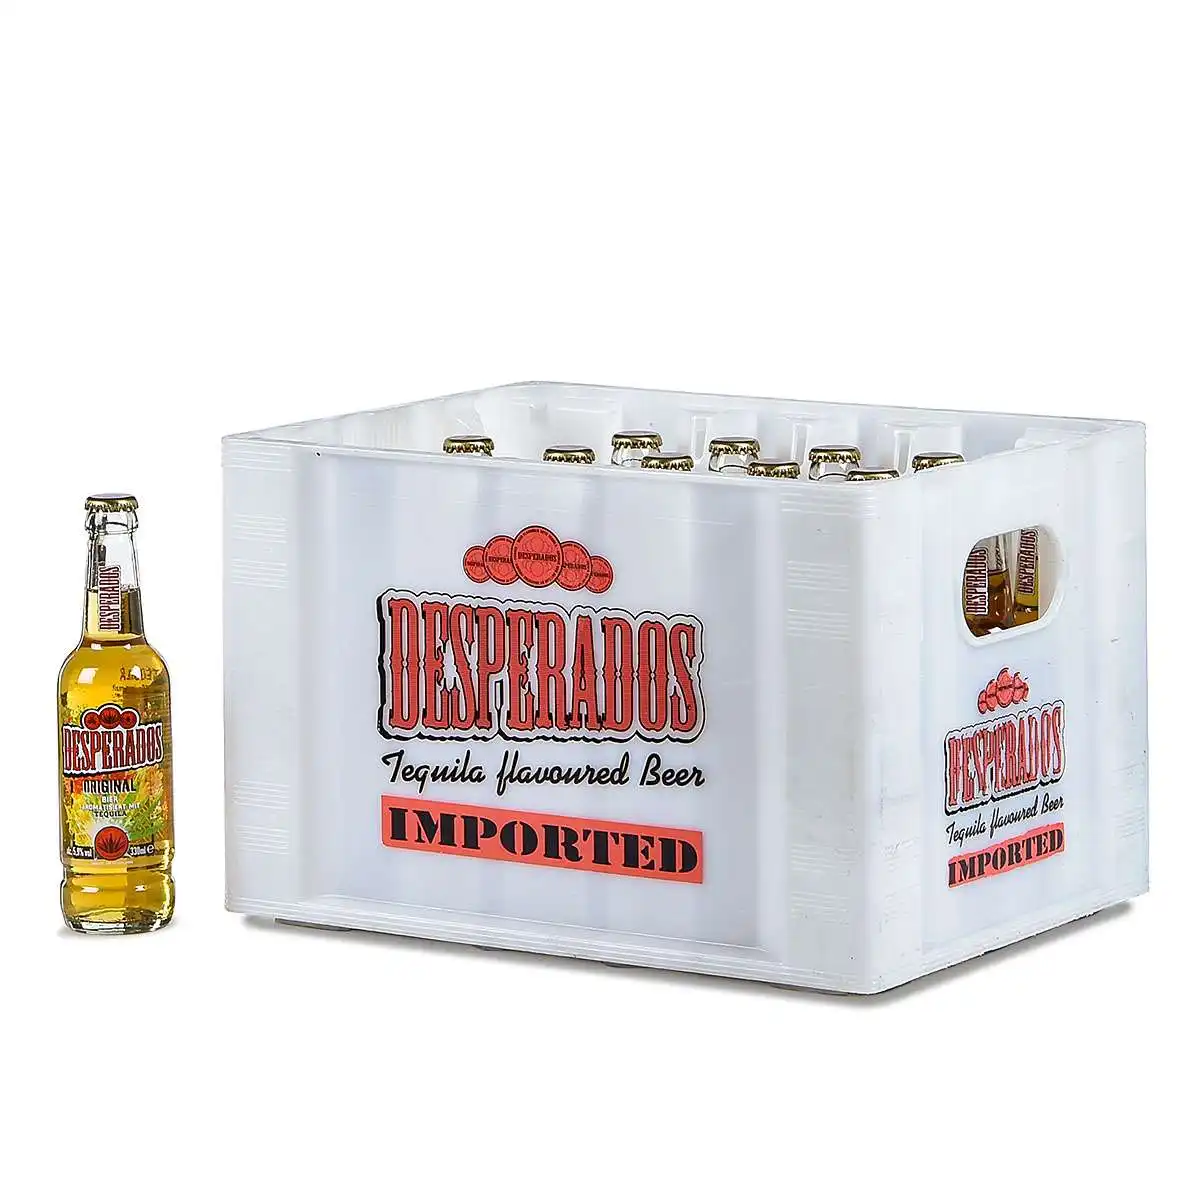 Desperados Beer Retail: Offer Your Customers an Unforgettable Experience